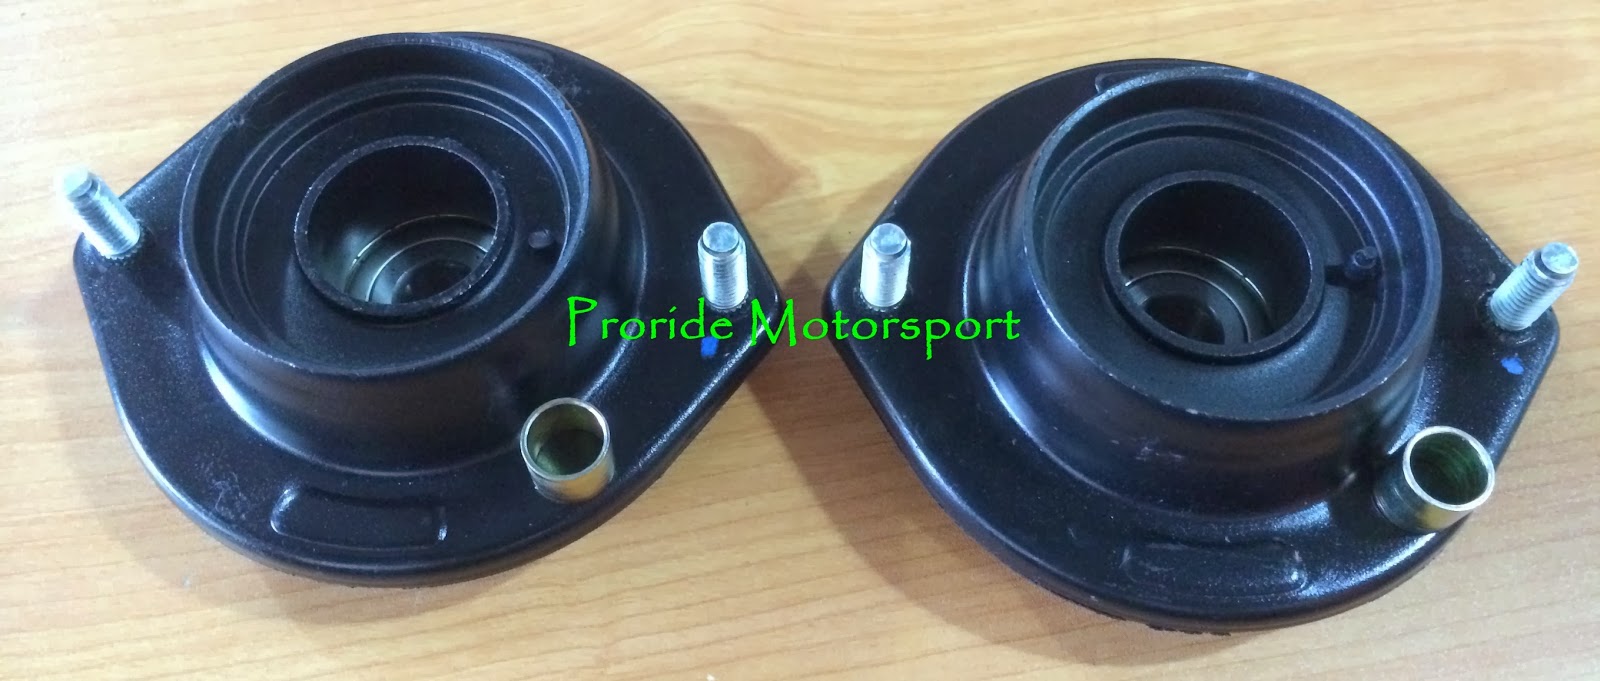 Pro-ride Motorsports: Bearing Absorber Mounting for 